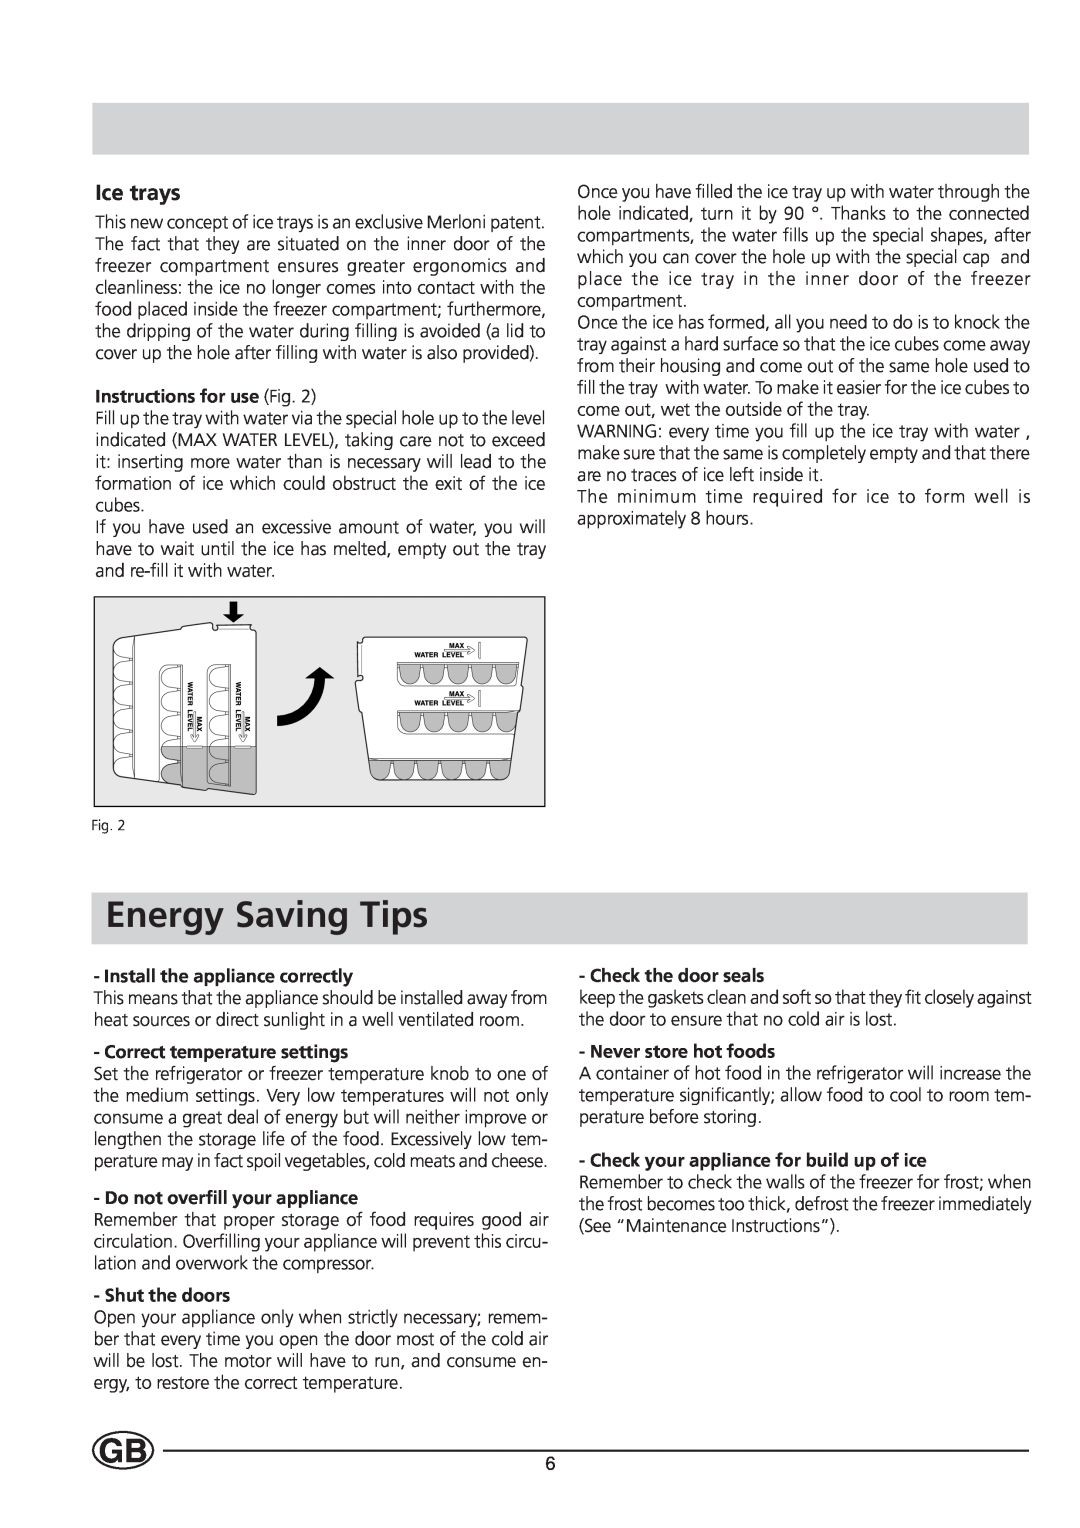 Indesit BA 13 GF Energy Saving Tips, Ice trays, Instructions for use Fig, Install the appliance correctly, Shut the doors 